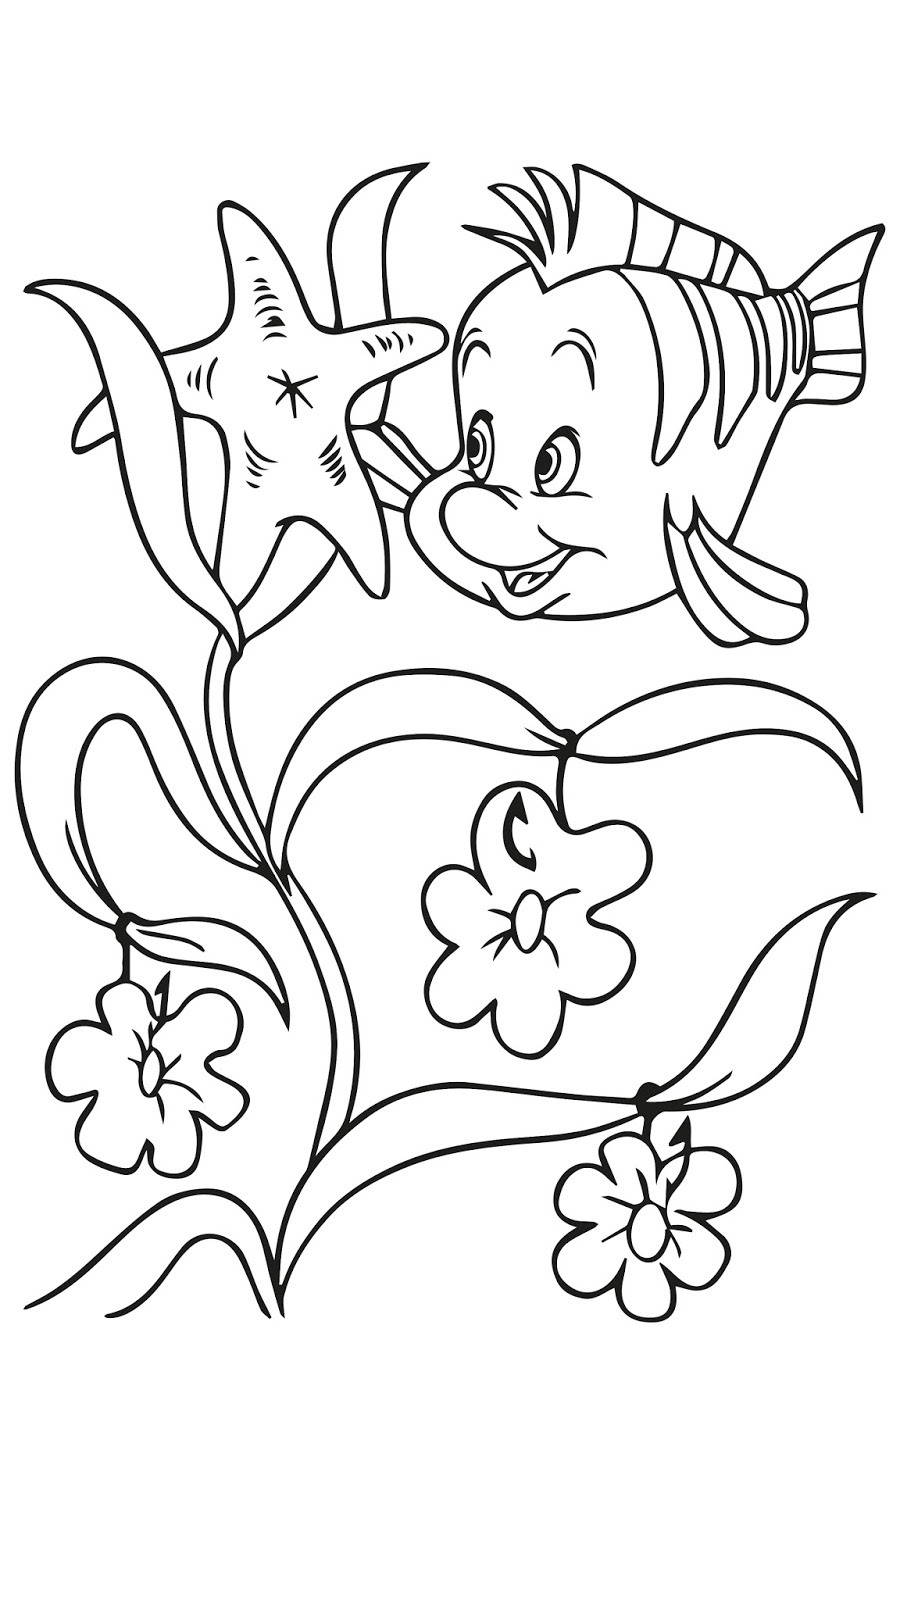 free-videos-for-kids-free-printable-coloring-pages-for-kids